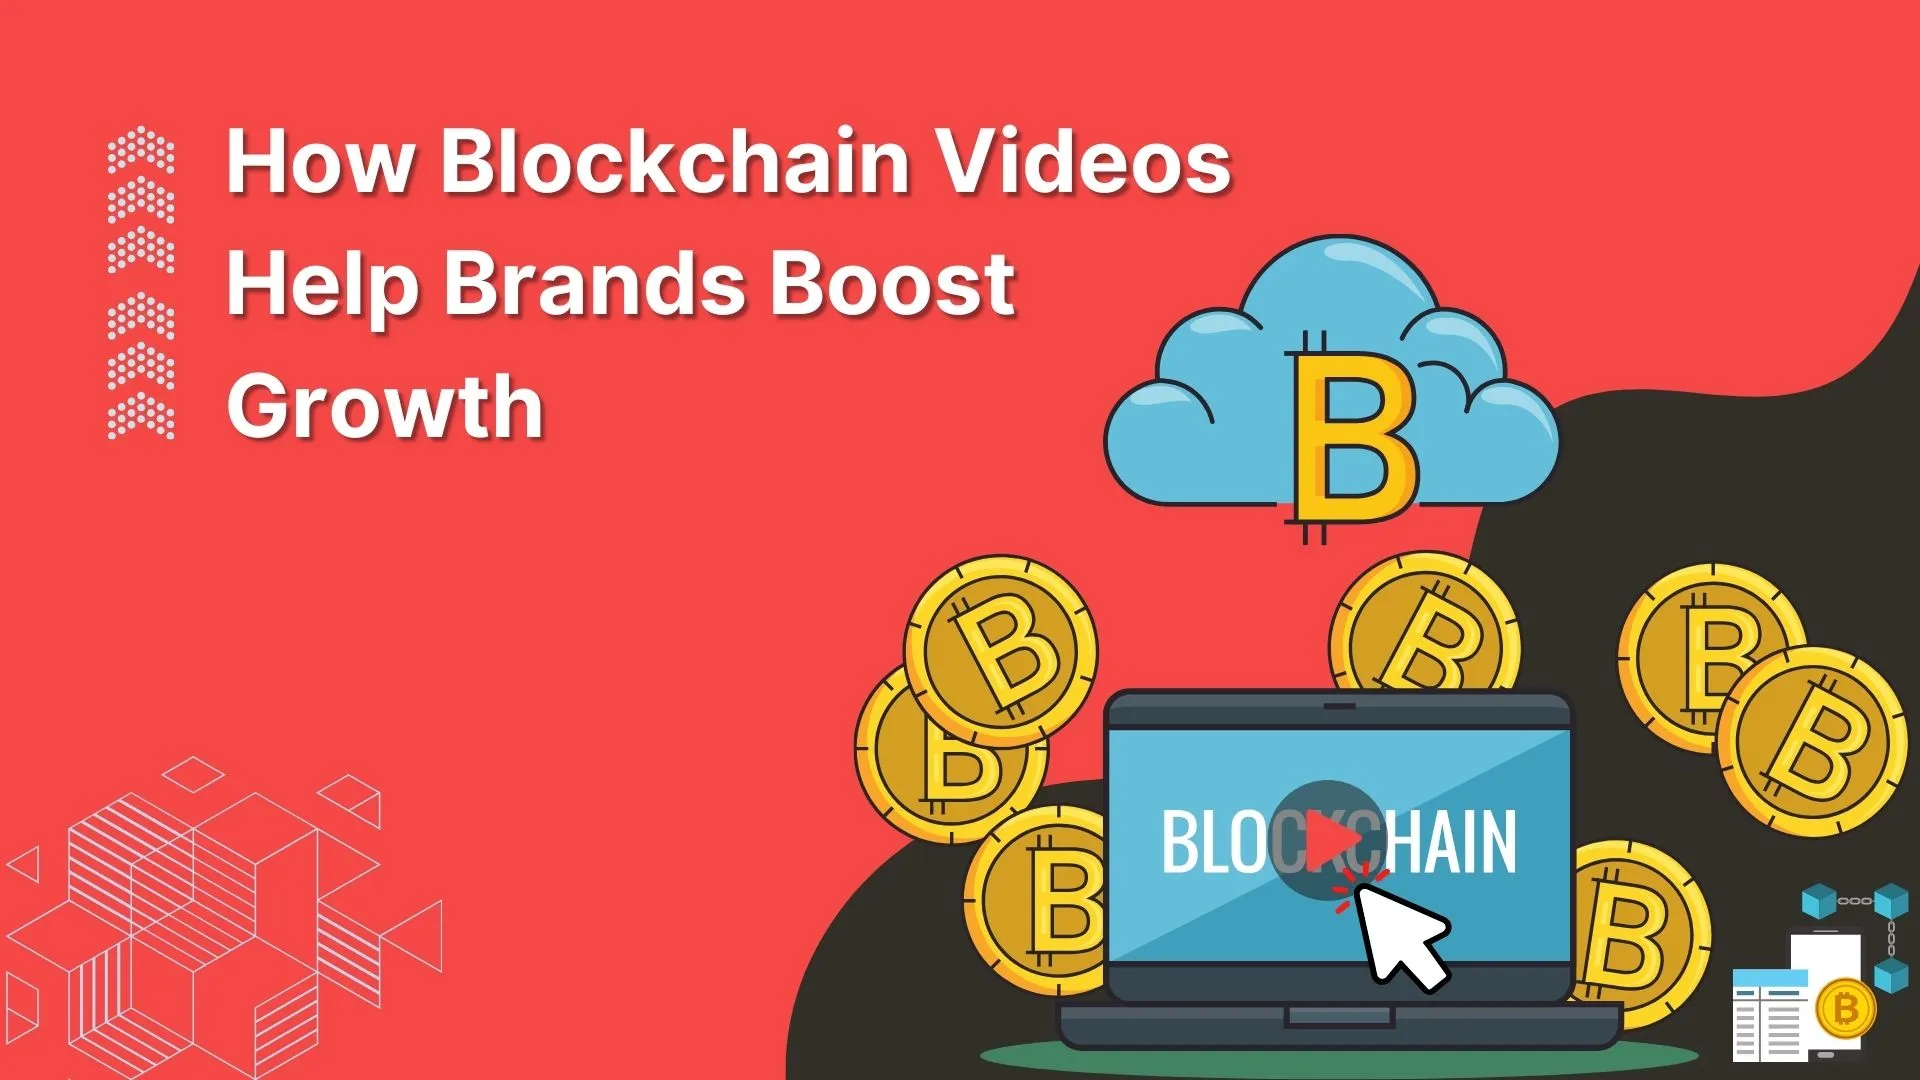 How Animated Blockchain Videos Help Brands Boost Growth